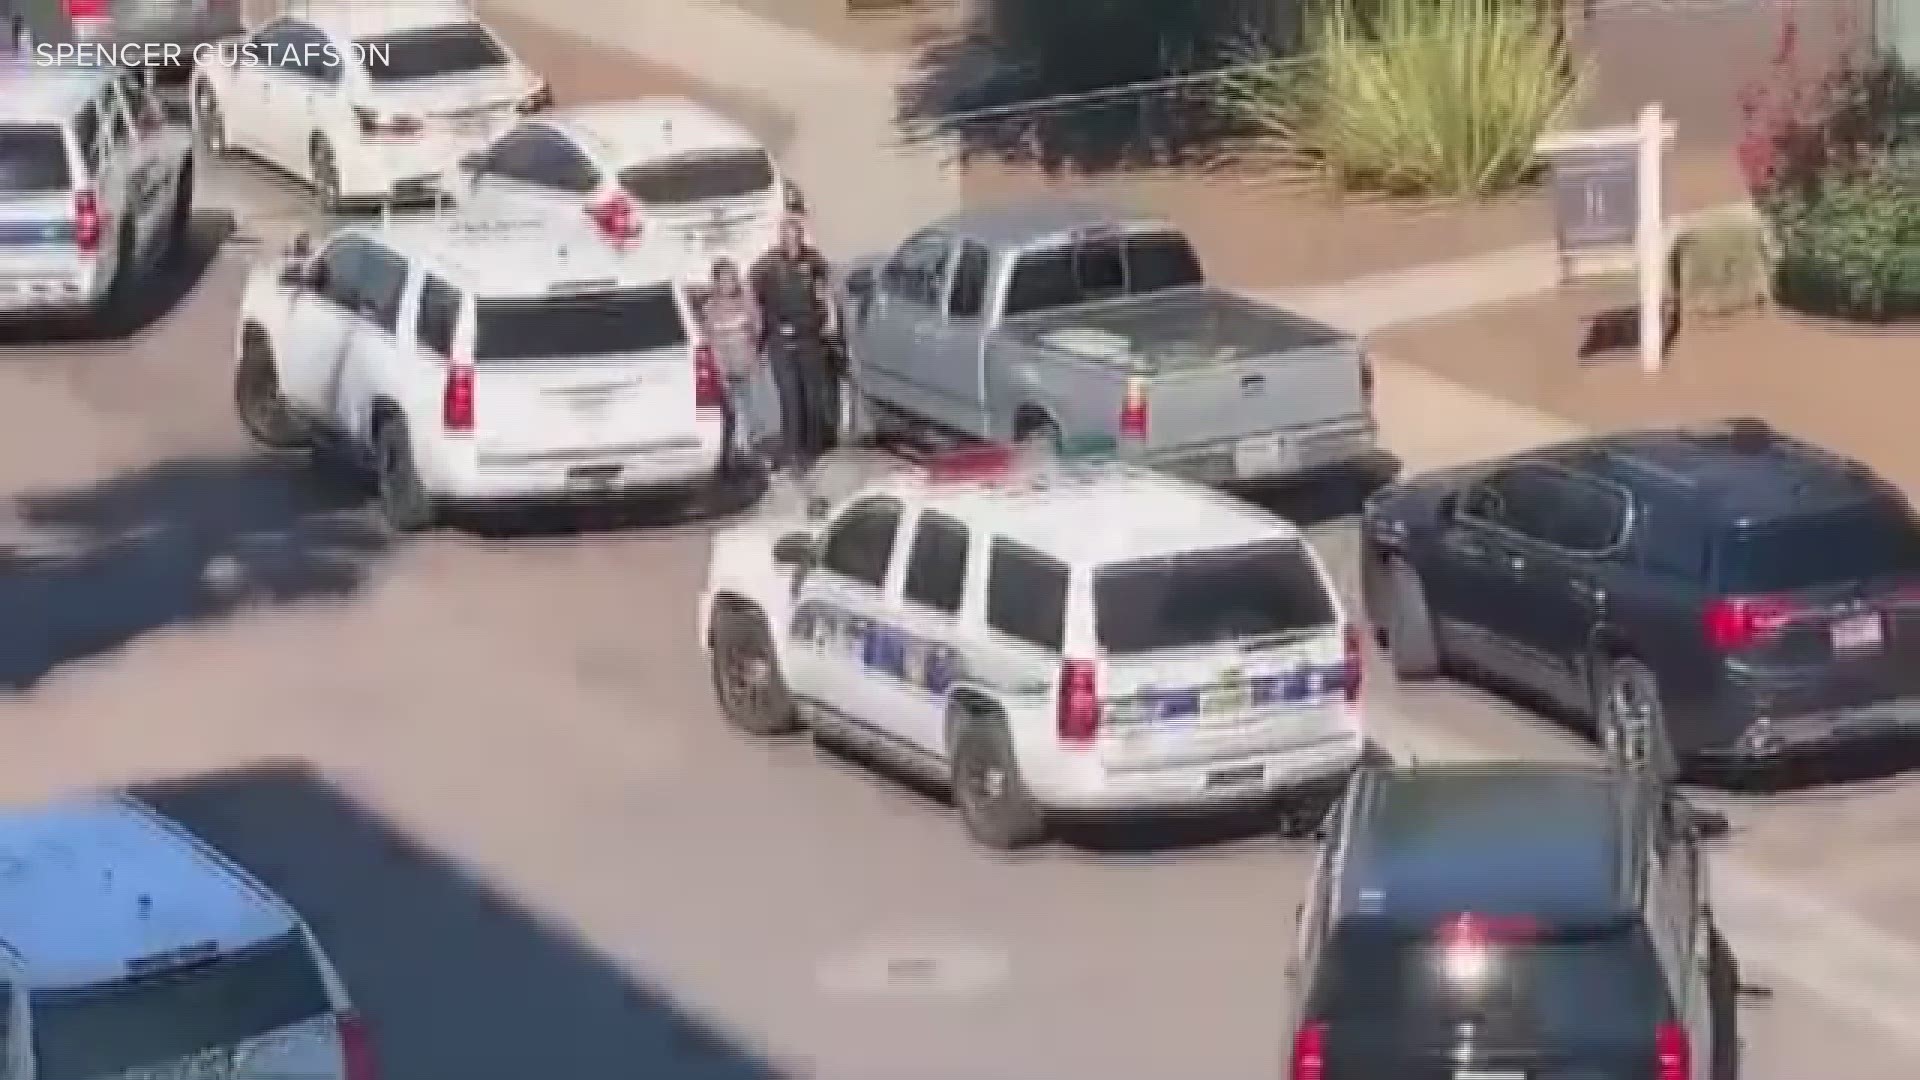 Video from Spencer G. shows a woman in handcuffs after a shooting in downtown Phoenix Tuesday. Police say they arrested a man and a woman.